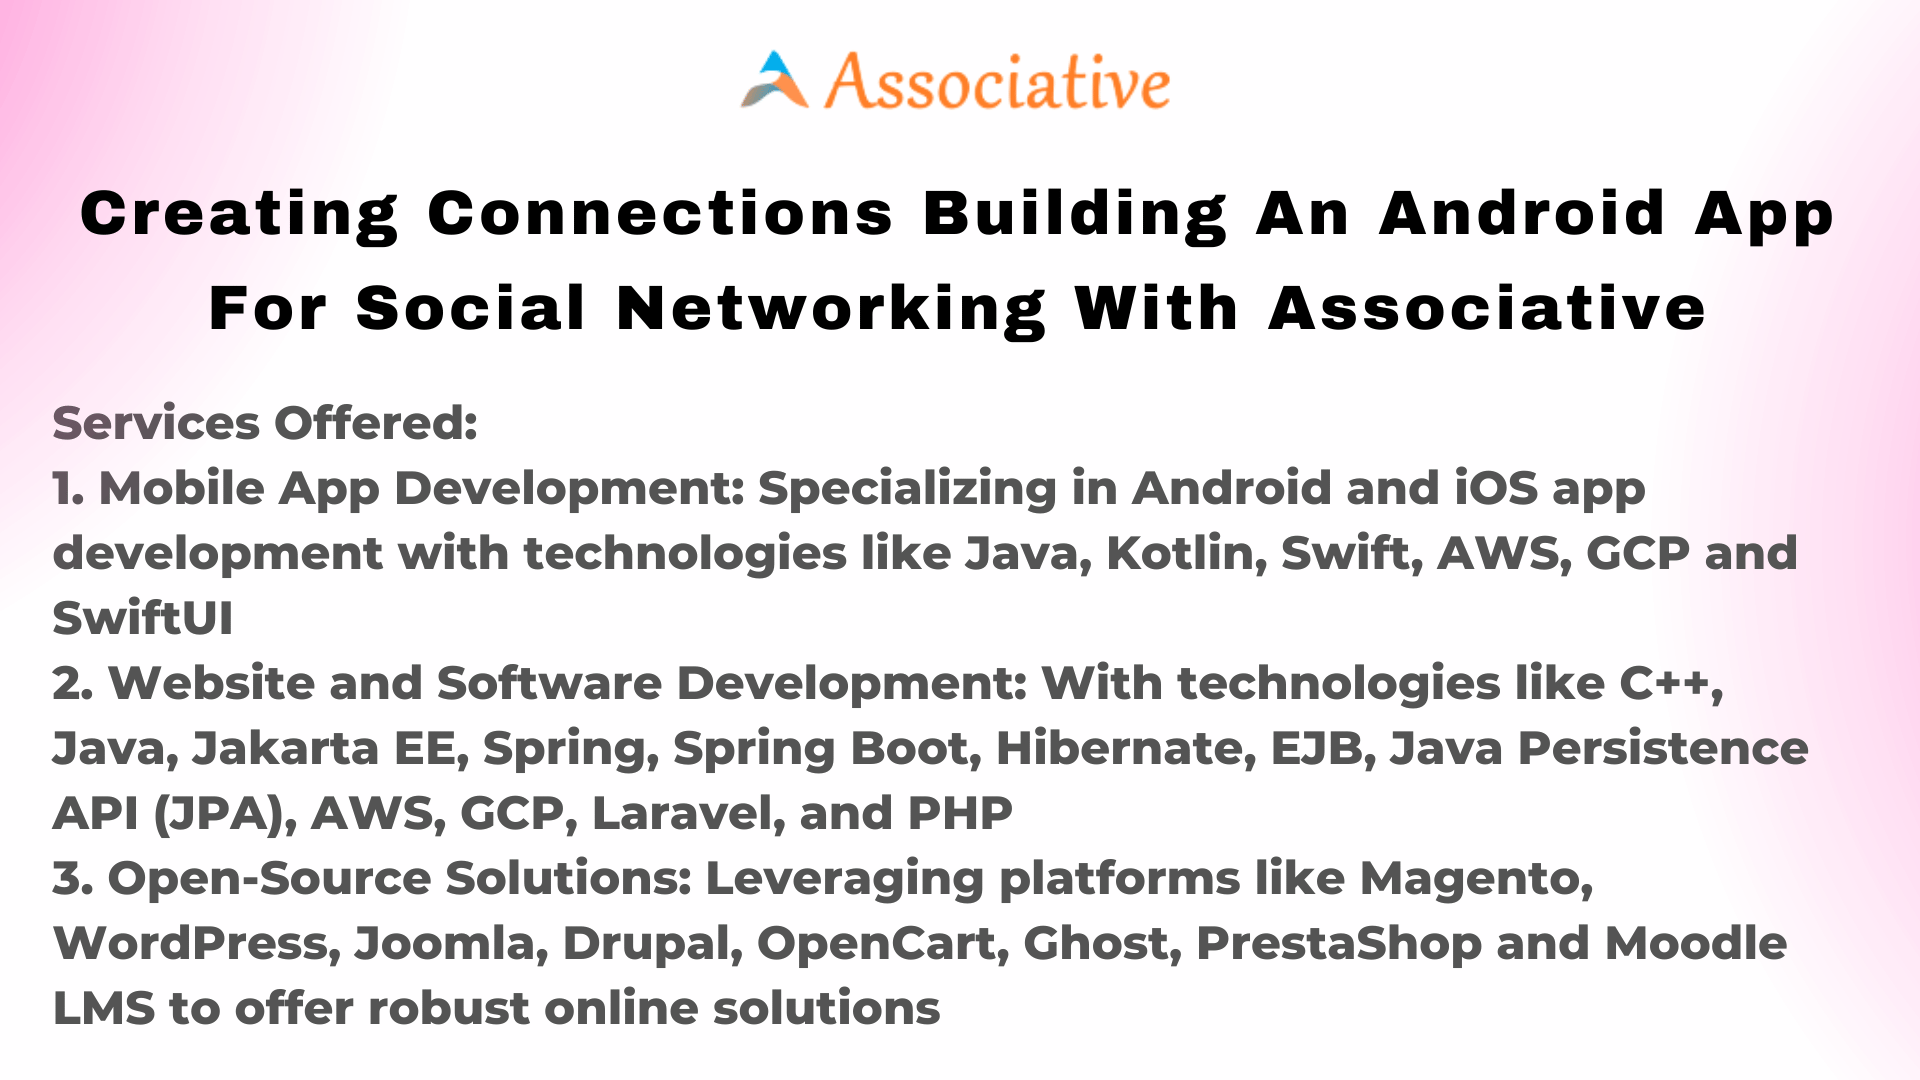 Creating Connections Building an Android App for Social Networking with Associative